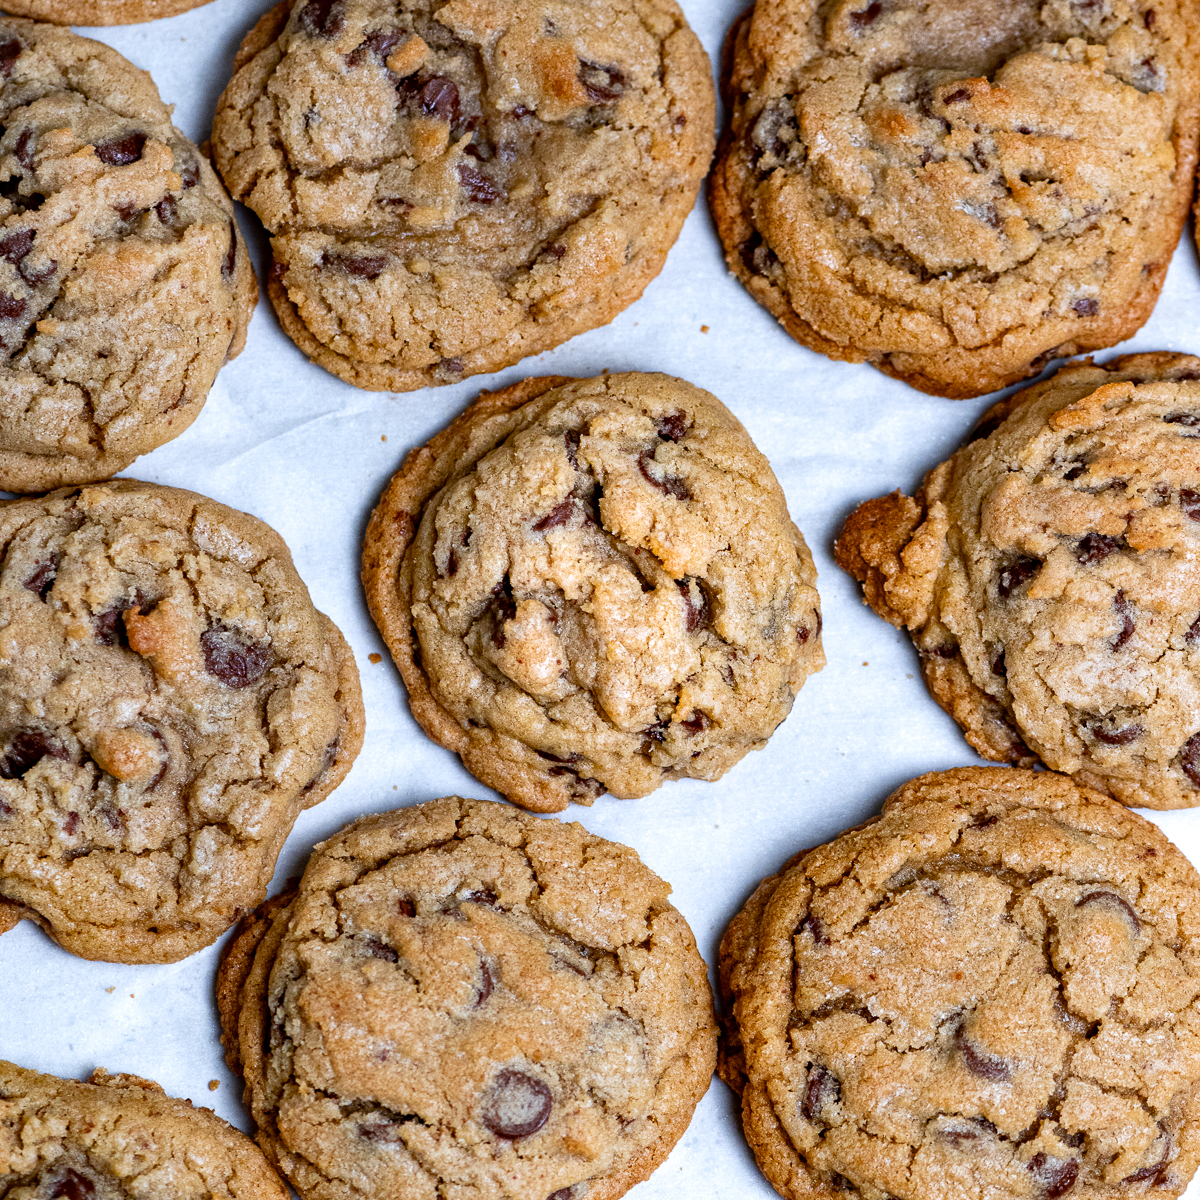 https://www.thegeneticchef.com/wp-content/uploads/2018/10/Thick-Chewy-Chocolate-Chip-Cookies-featsq-1.jpg